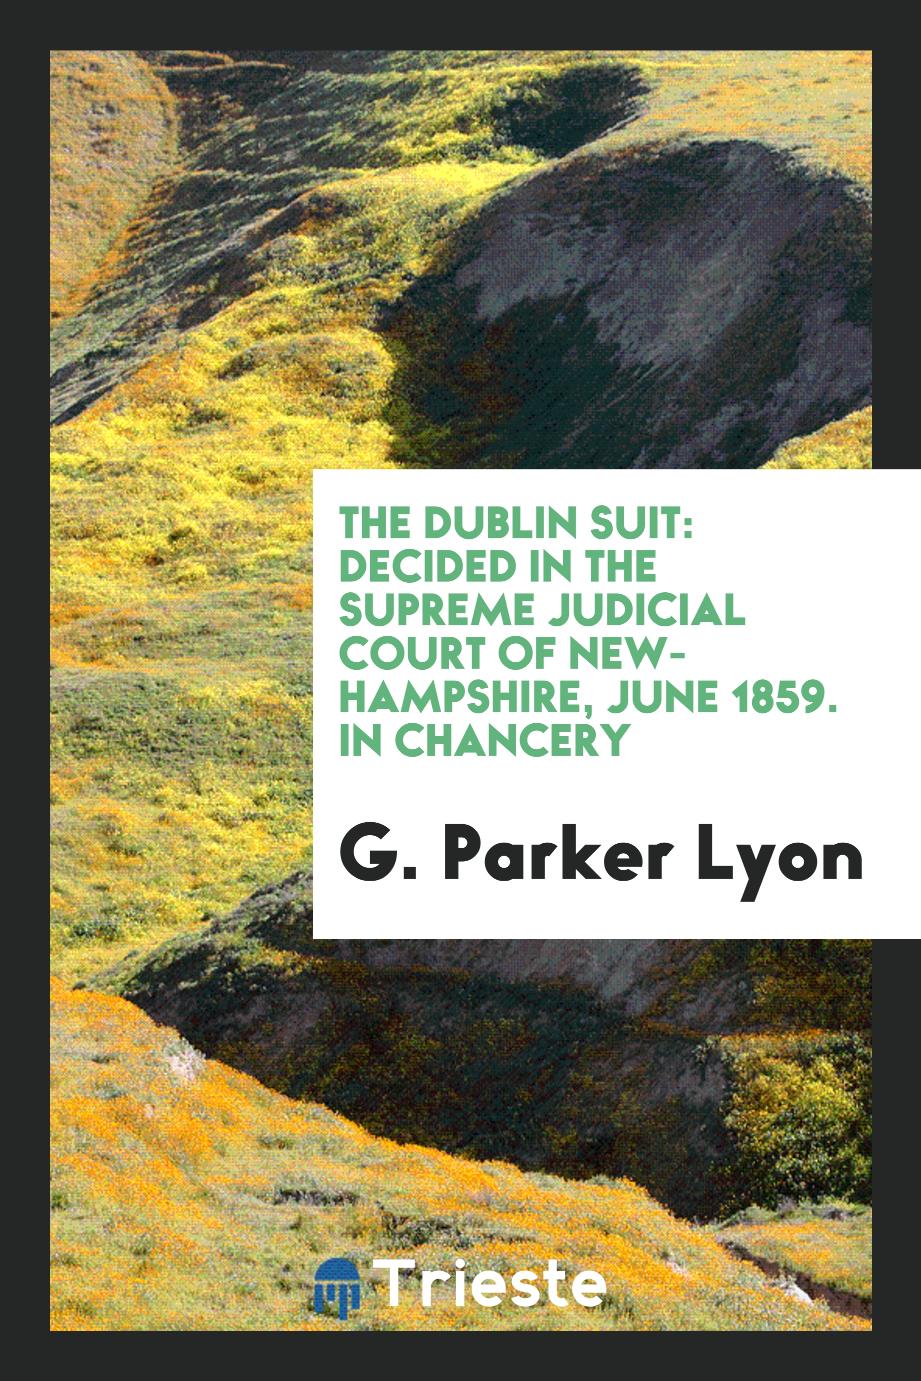 The Dublin Suit: Decided in the Supreme Judicial Court of New-Hampshire, June 1859. In Chancery